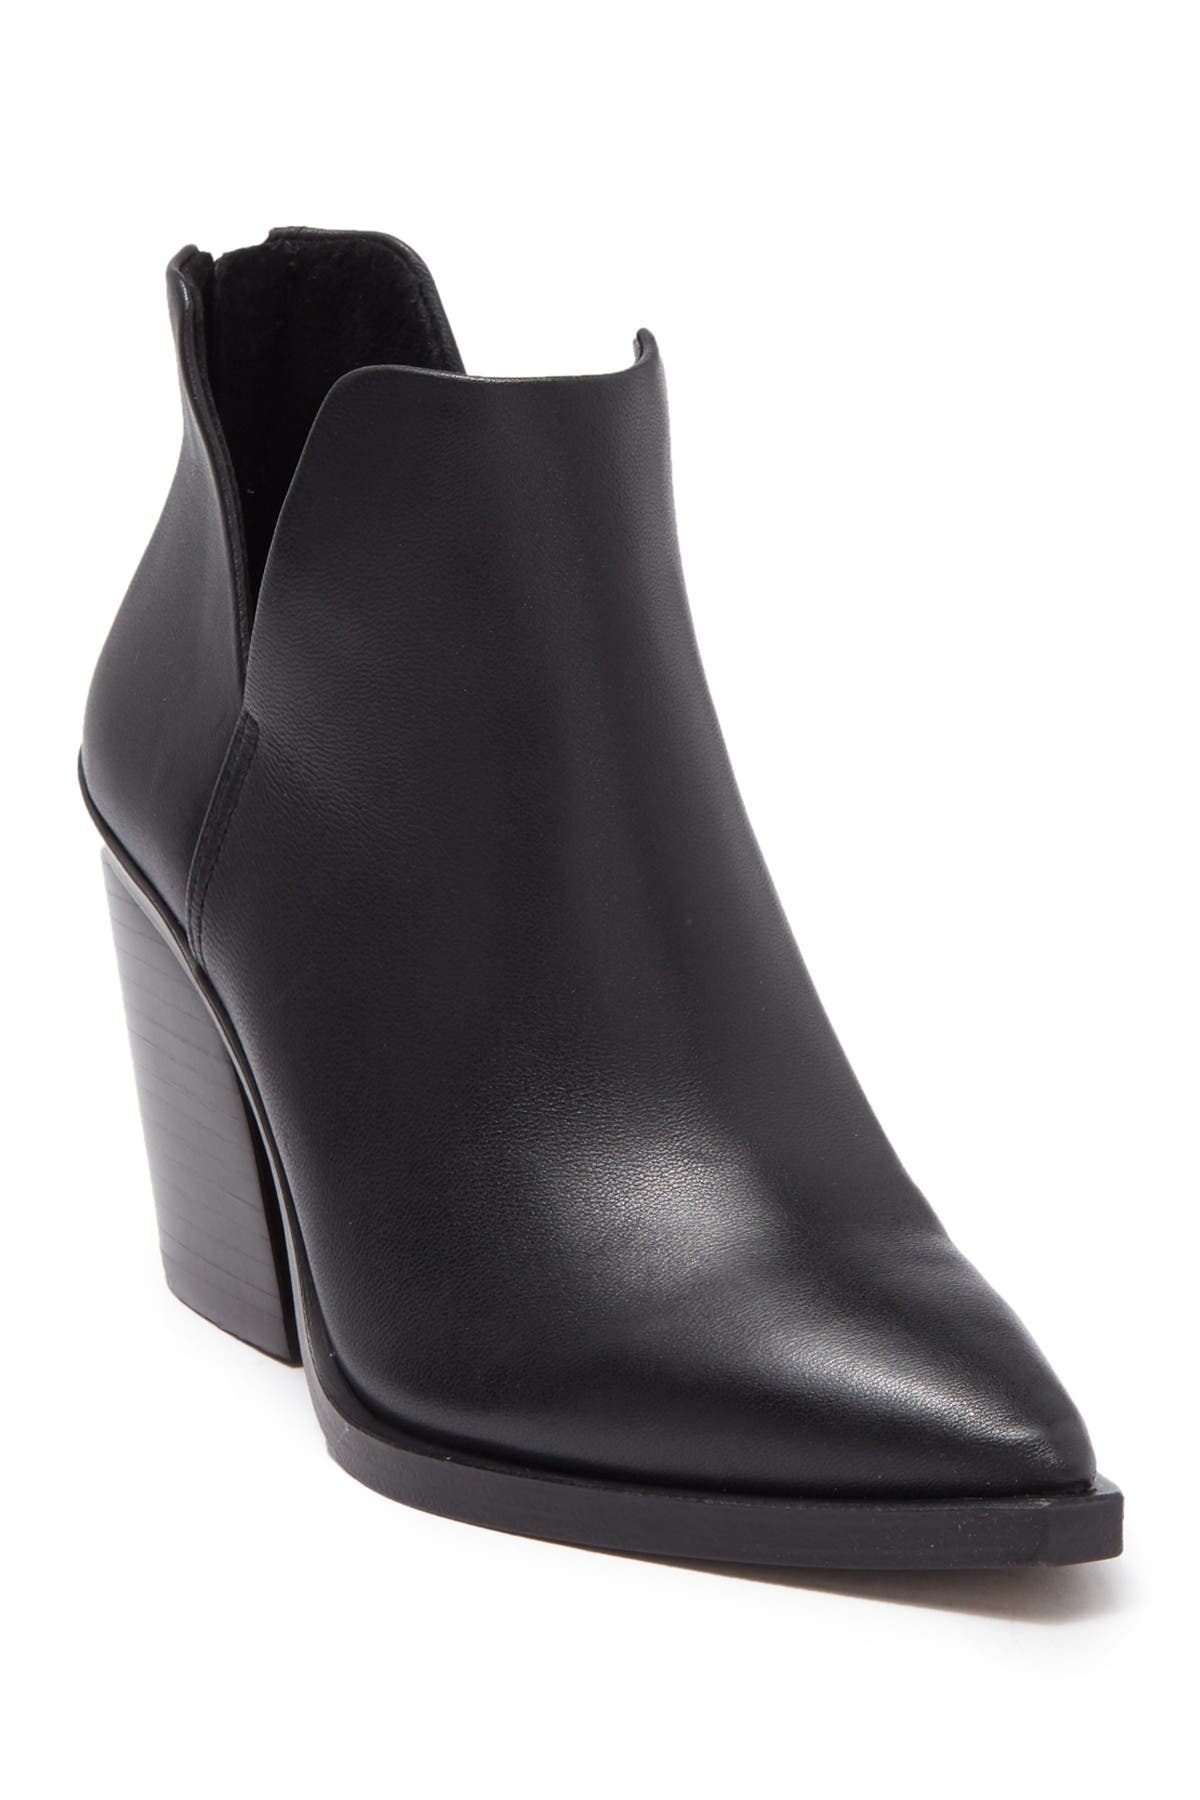 Buy > vince camuto pointed toe bootie > in stock